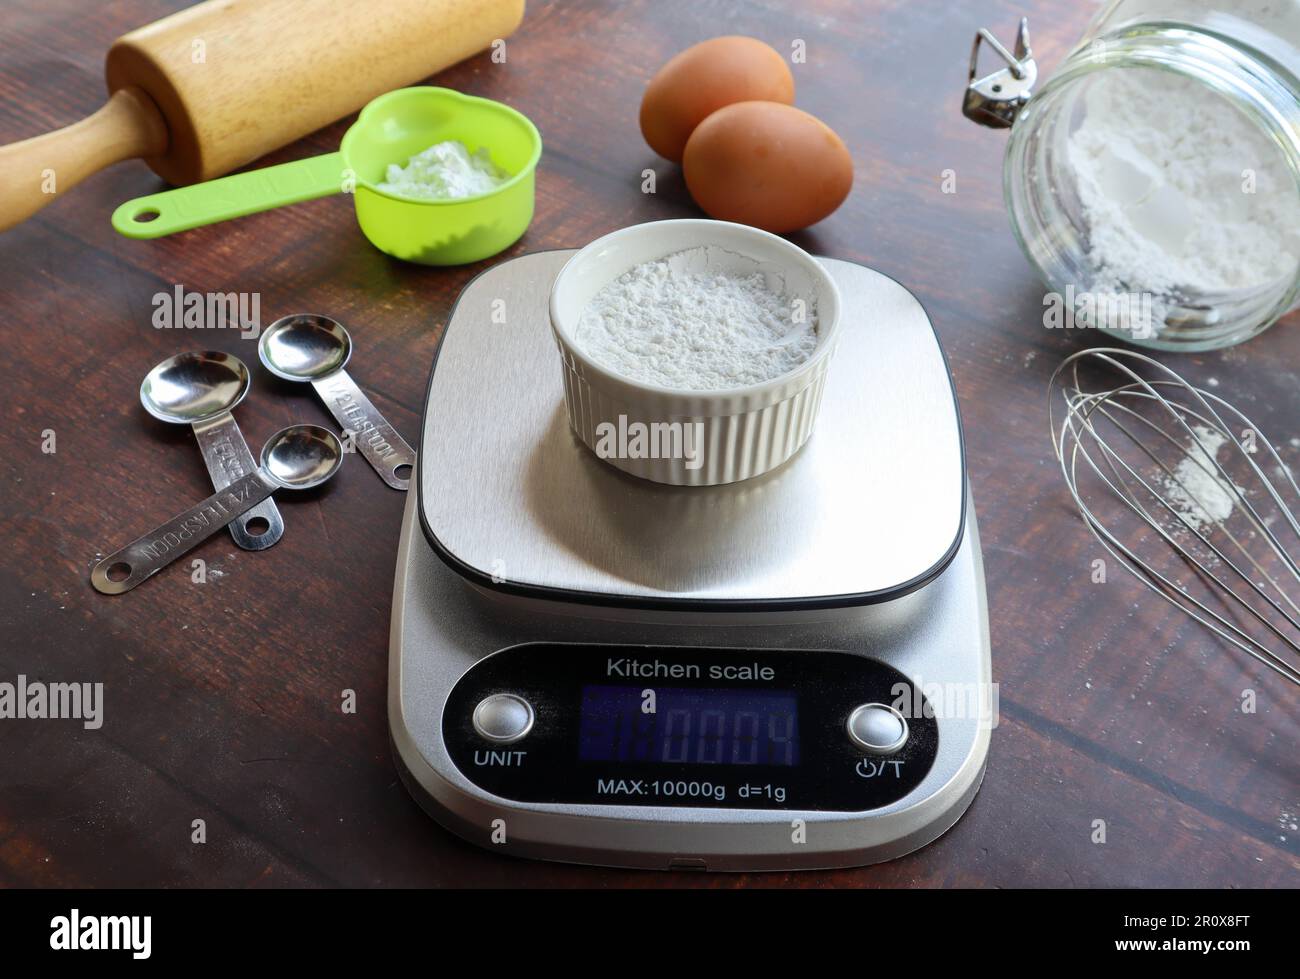 https://c8.alamy.com/comp/2R0X8FT/kitchen-digital-scale-with-flour-on-the-top-preparation-for-bakery-baking-concept-2R0X8FT.jpg